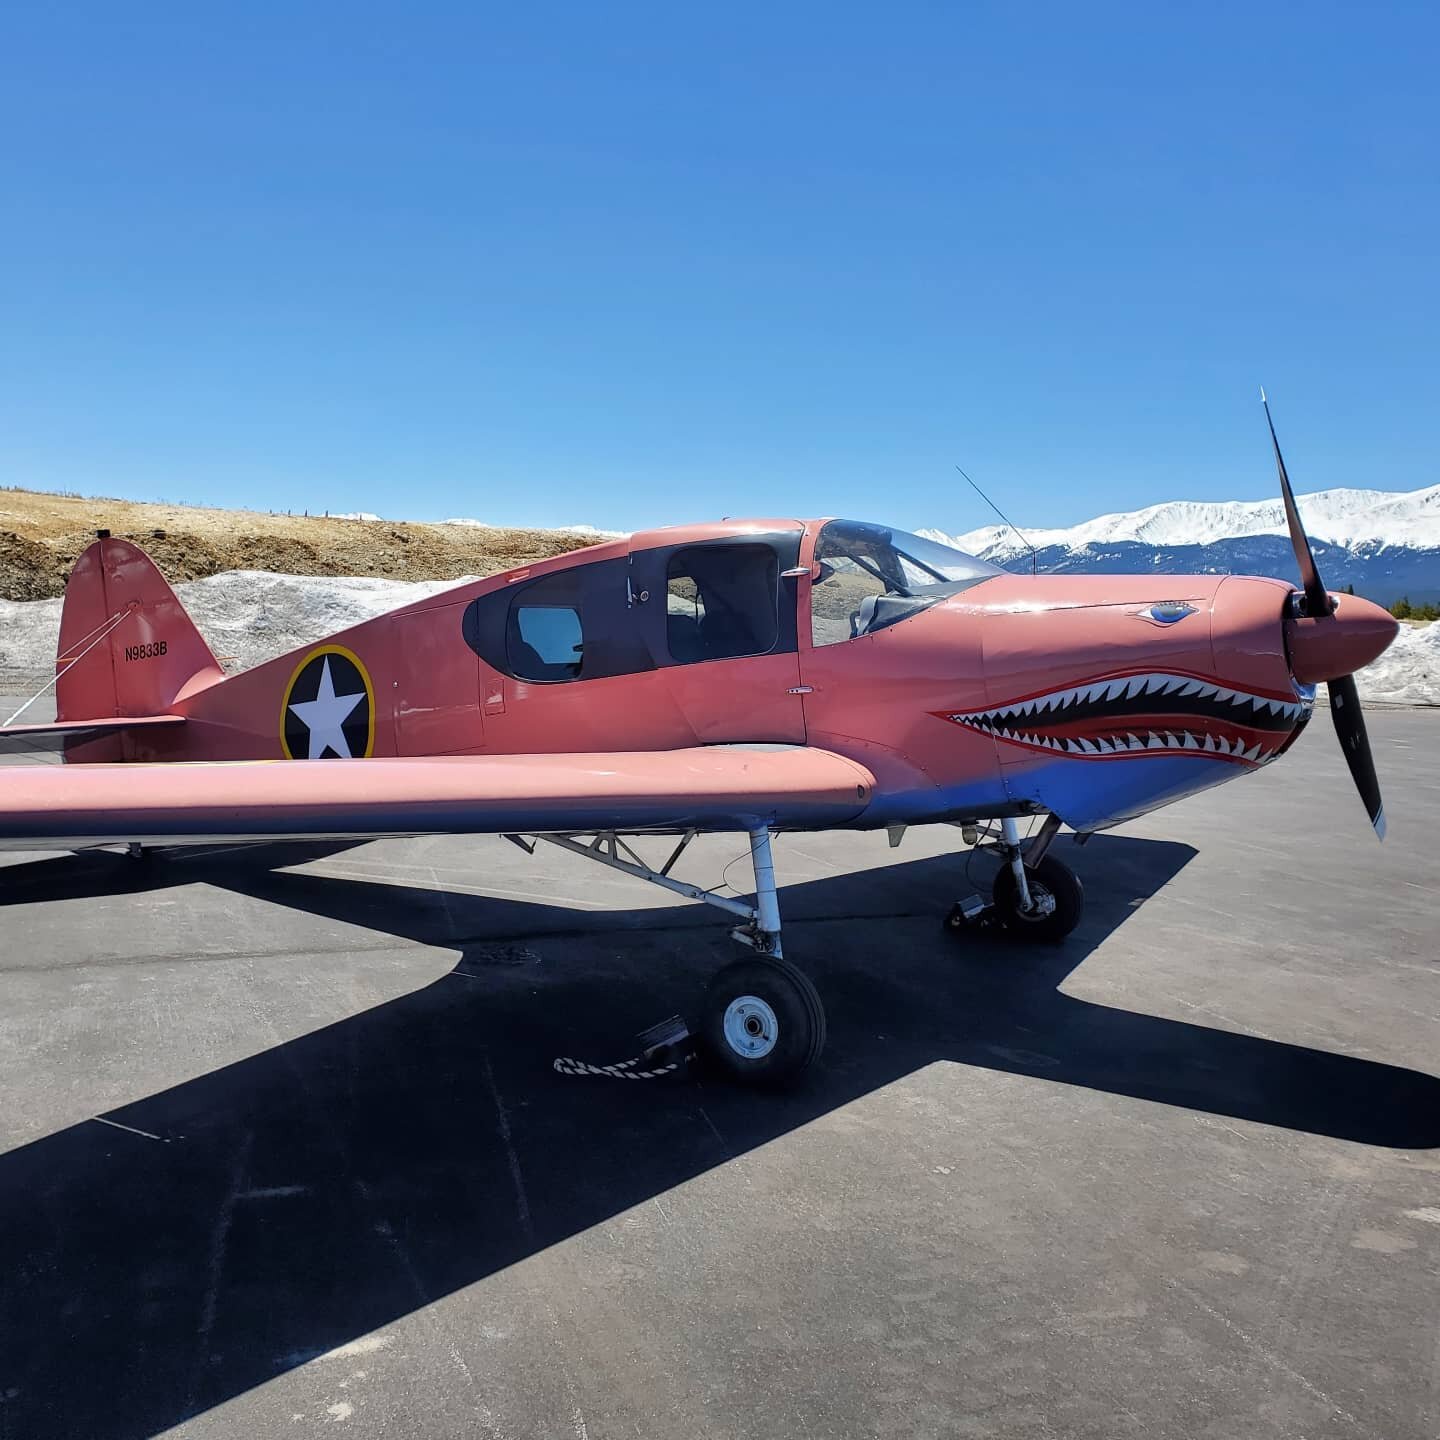 Check out the paint job on this Bellanca 14-19 Cruisemaster!

#aviation #pilot #vintage #mountainflying #flying #leadville #colorado